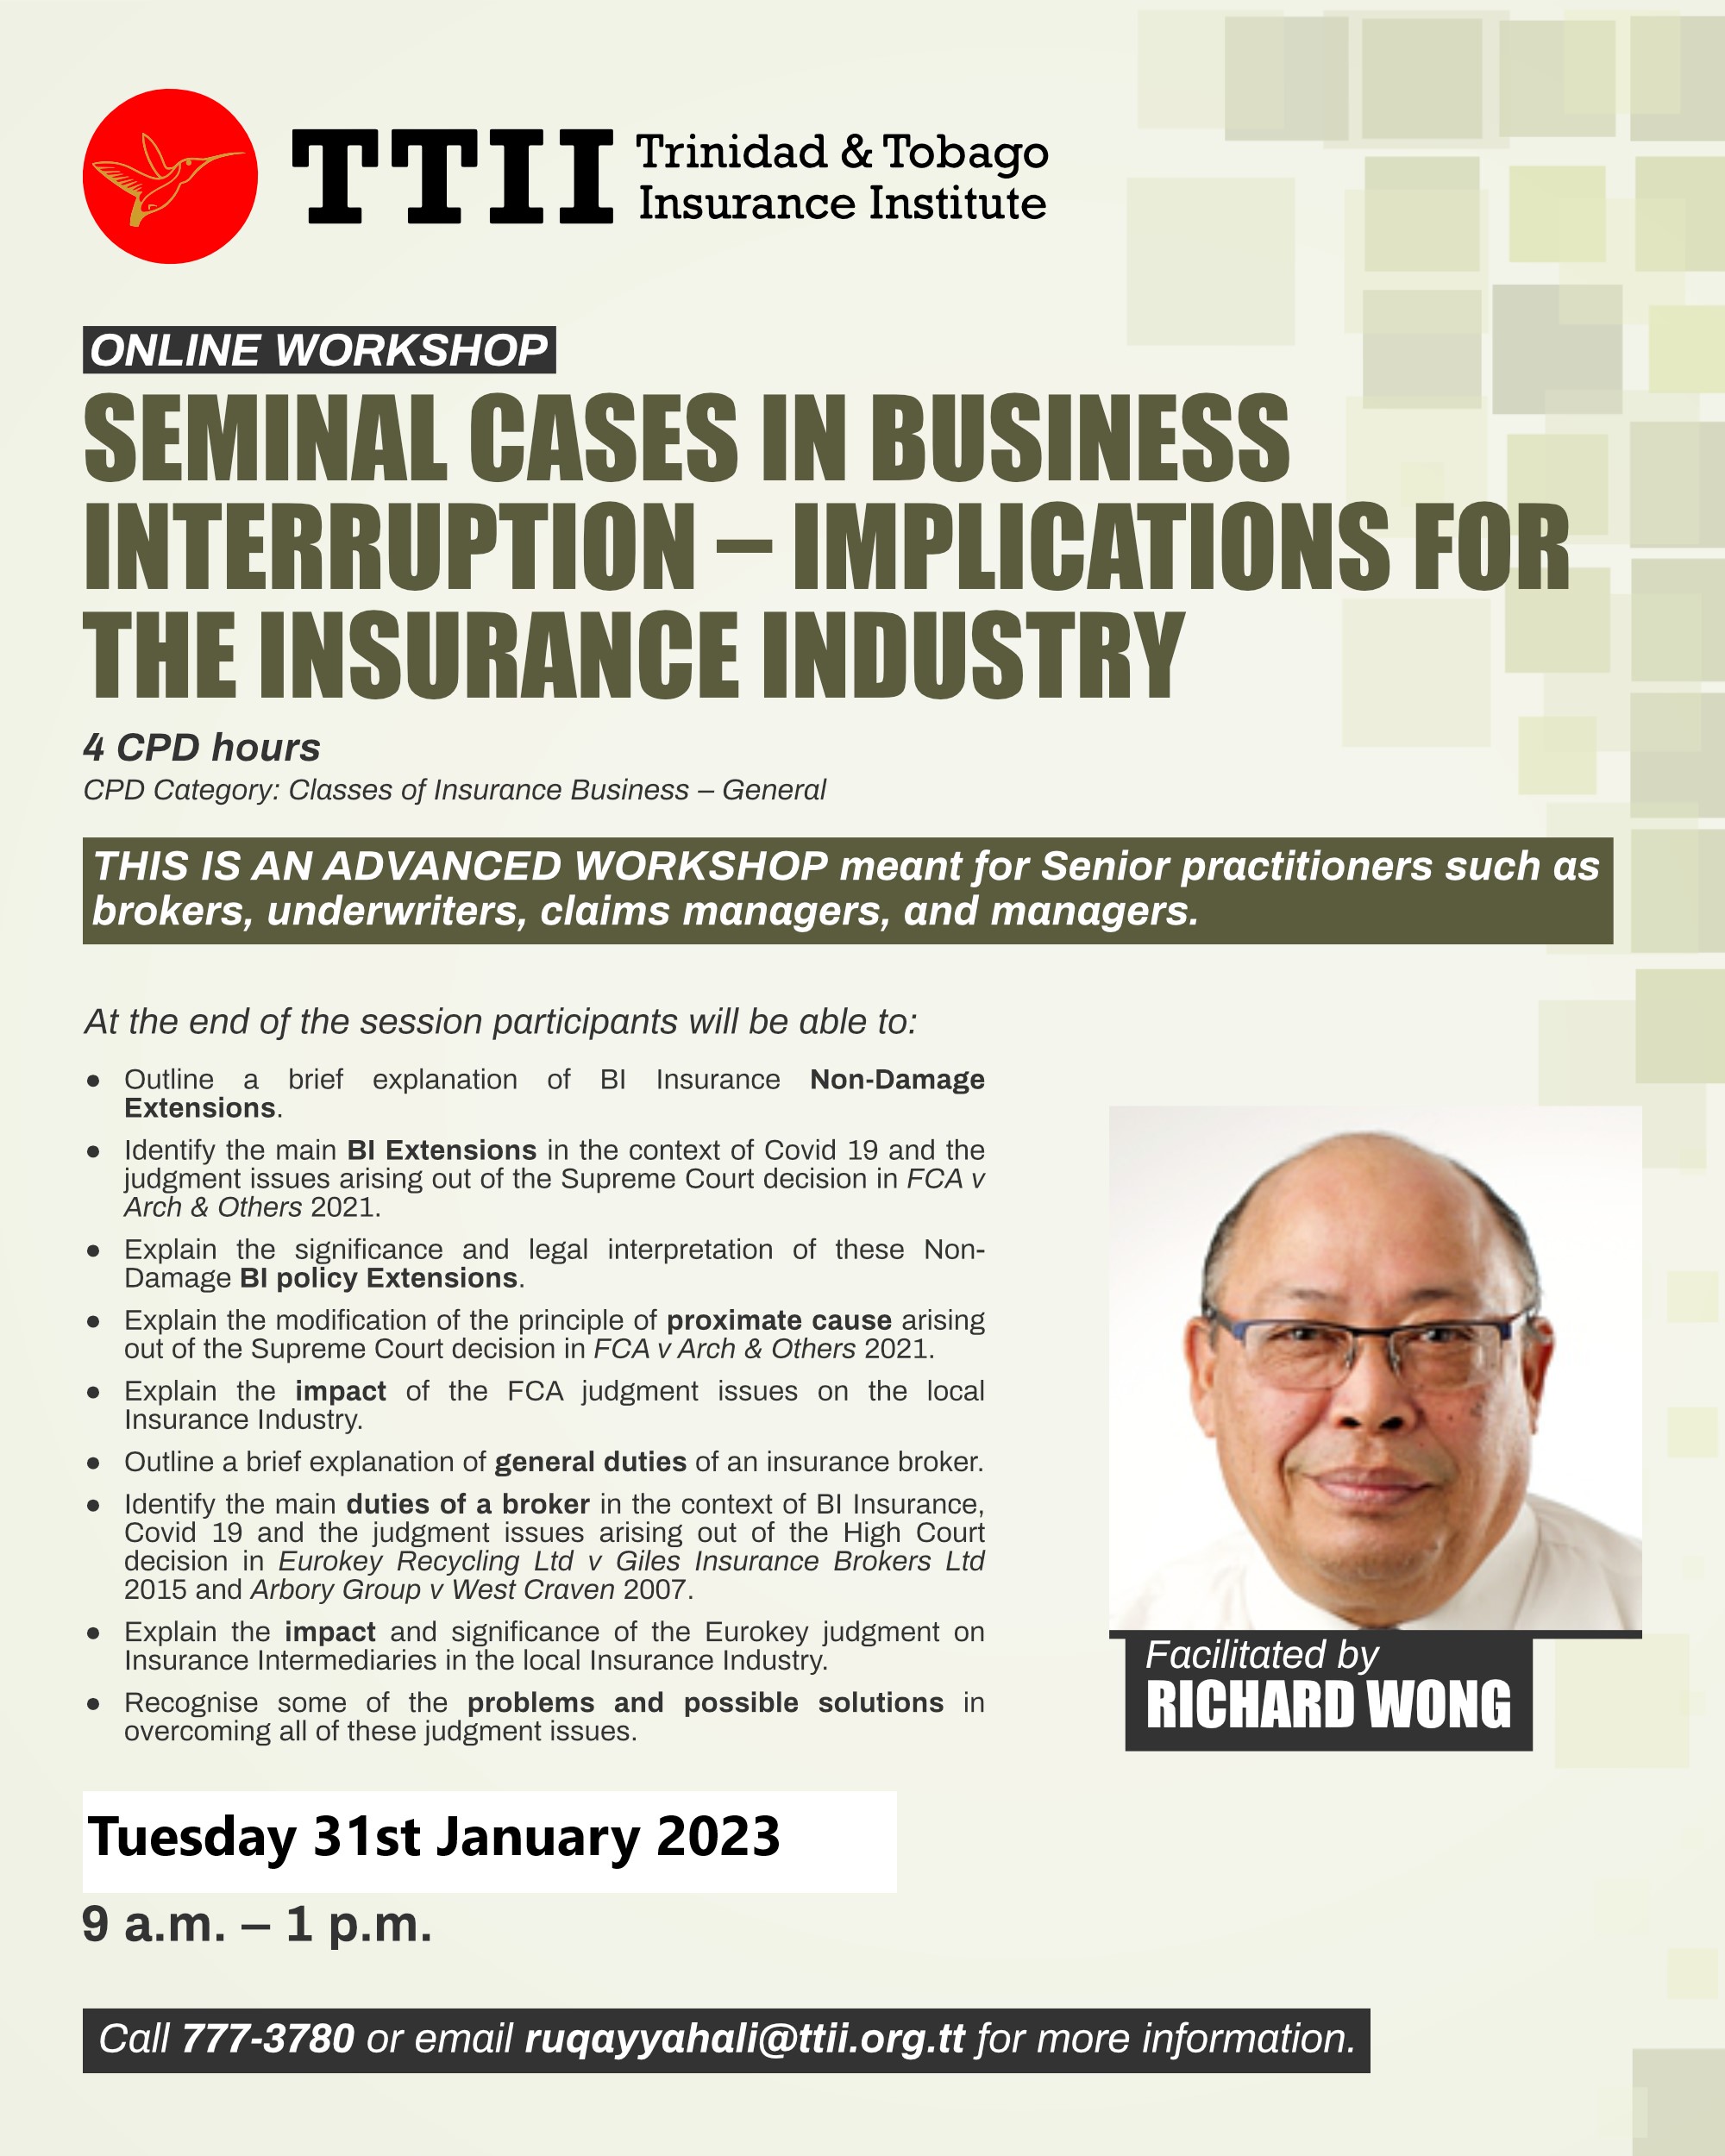 Seminal Cases in Business Interruption – Implications for the Insurance Industry